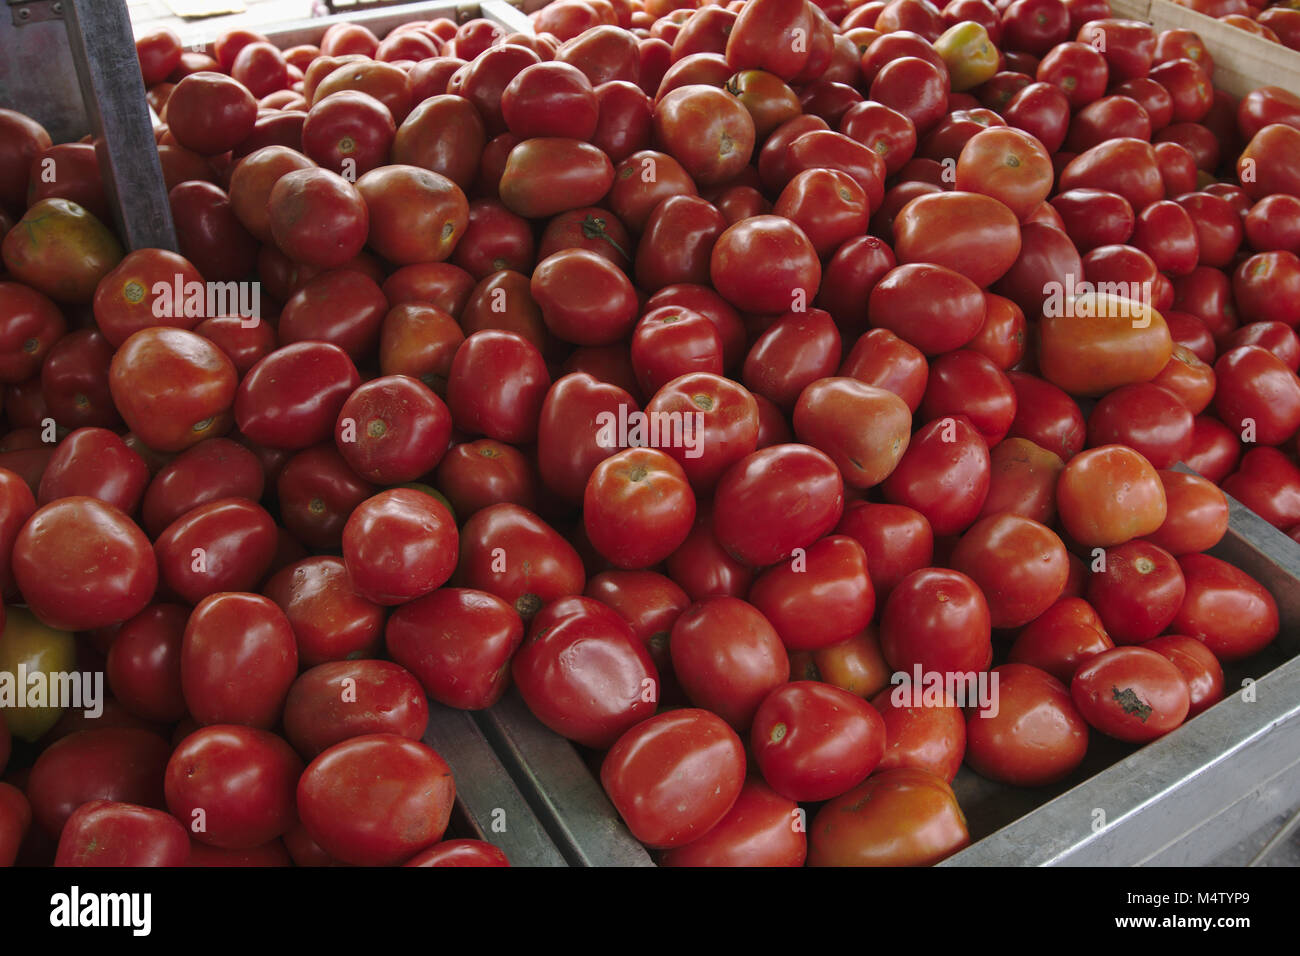 Roma tomatoes at a farmers market stall. Stock Photo